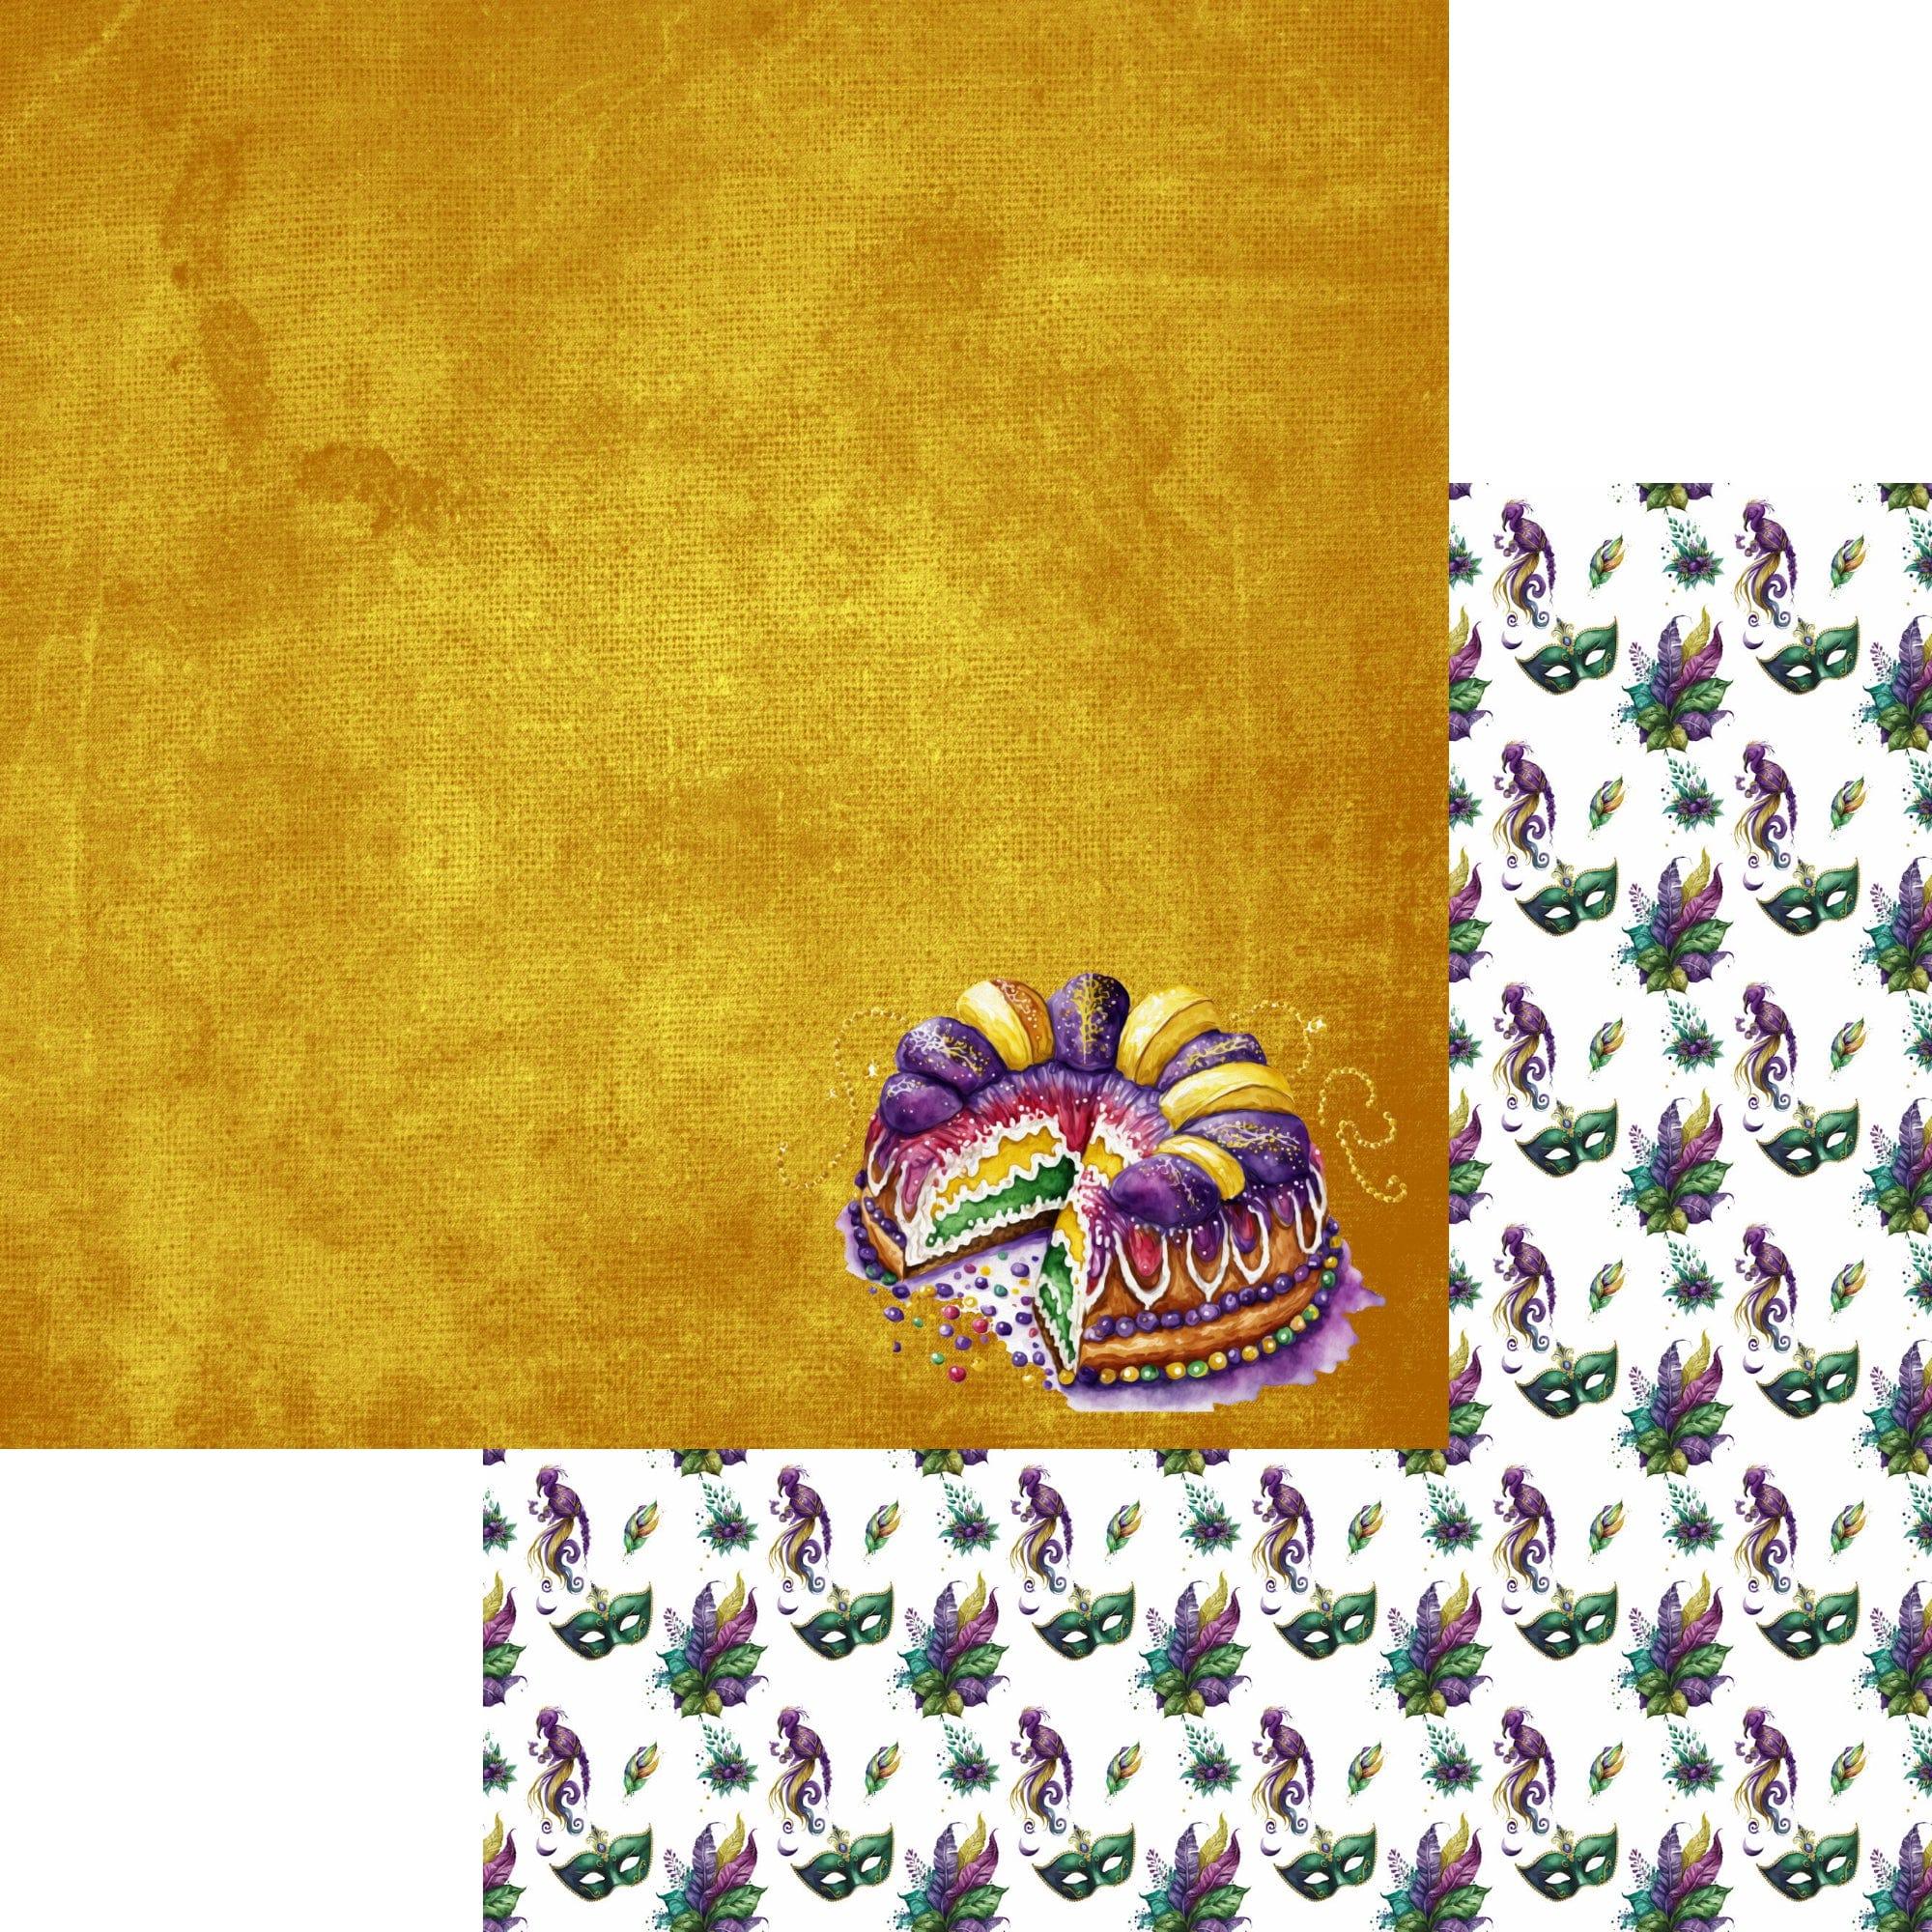 Mardi Gras Collection 12 x 12 Double-Sided Scrapbook Paper & Ephemera Embellishments Kit by SSC Designs - Scrapbook Supply Companies